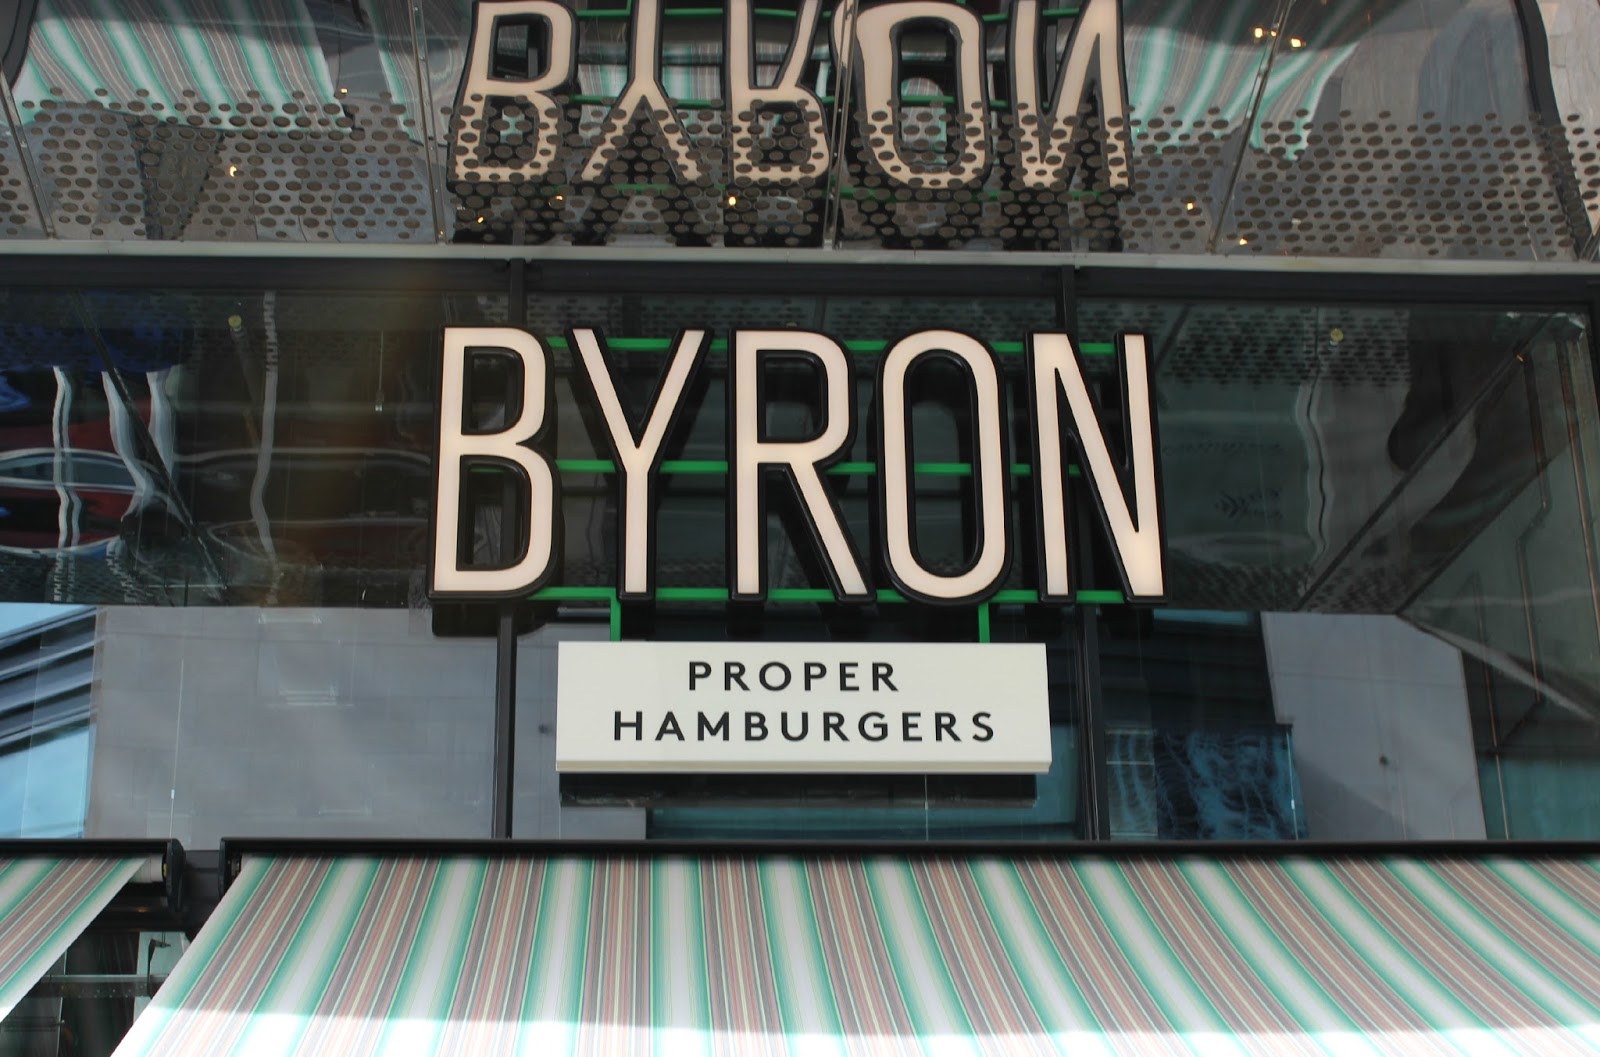 A picture of Byron Burger Highcross Leicester